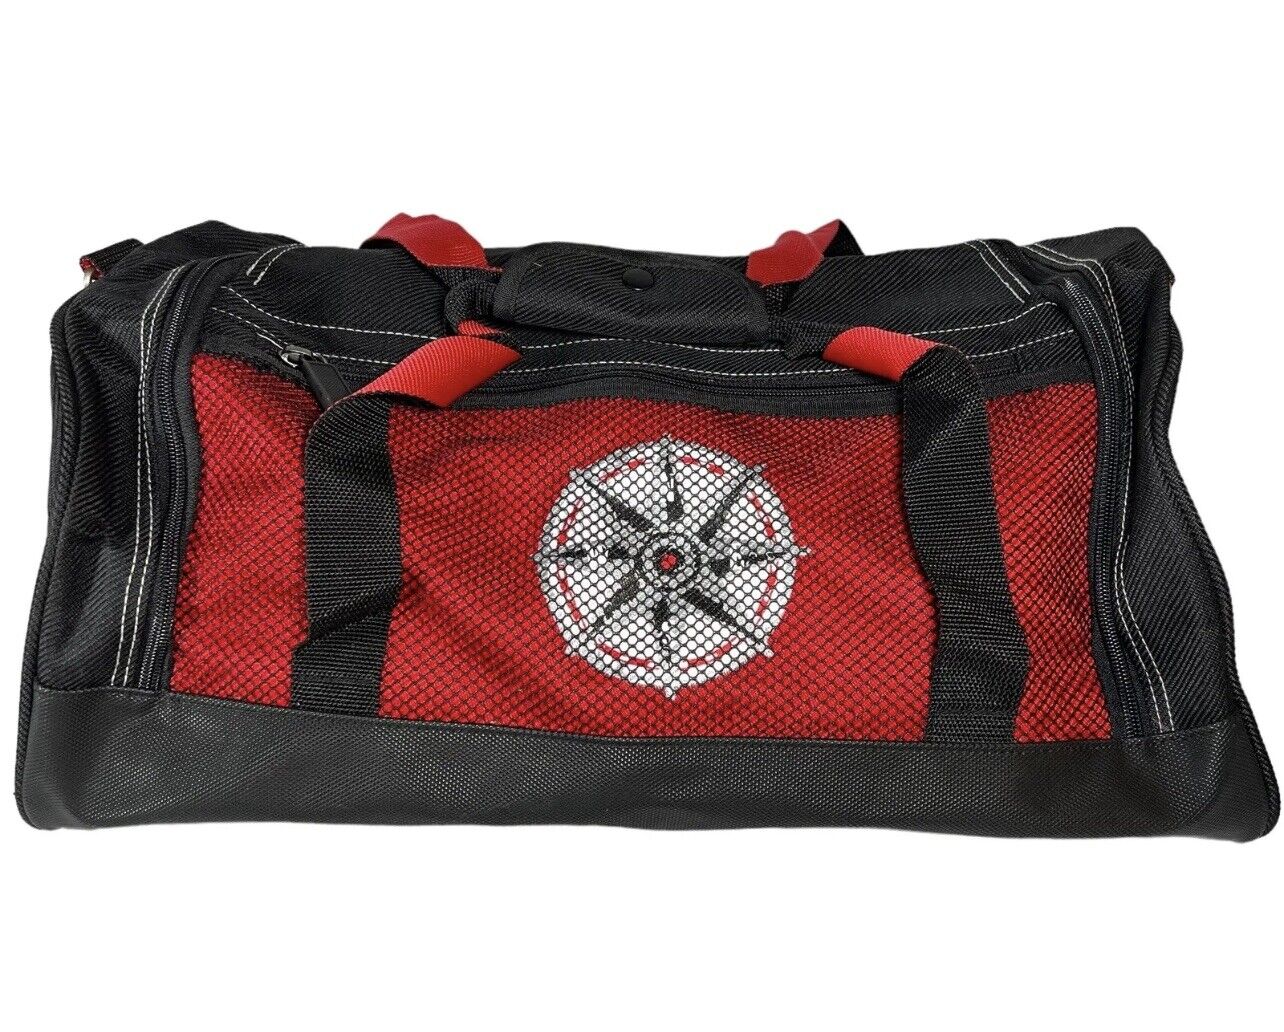 Vintage 1997 Marlboro Unlimited Gear Black & Red Duffel  Bag with Compass NWT